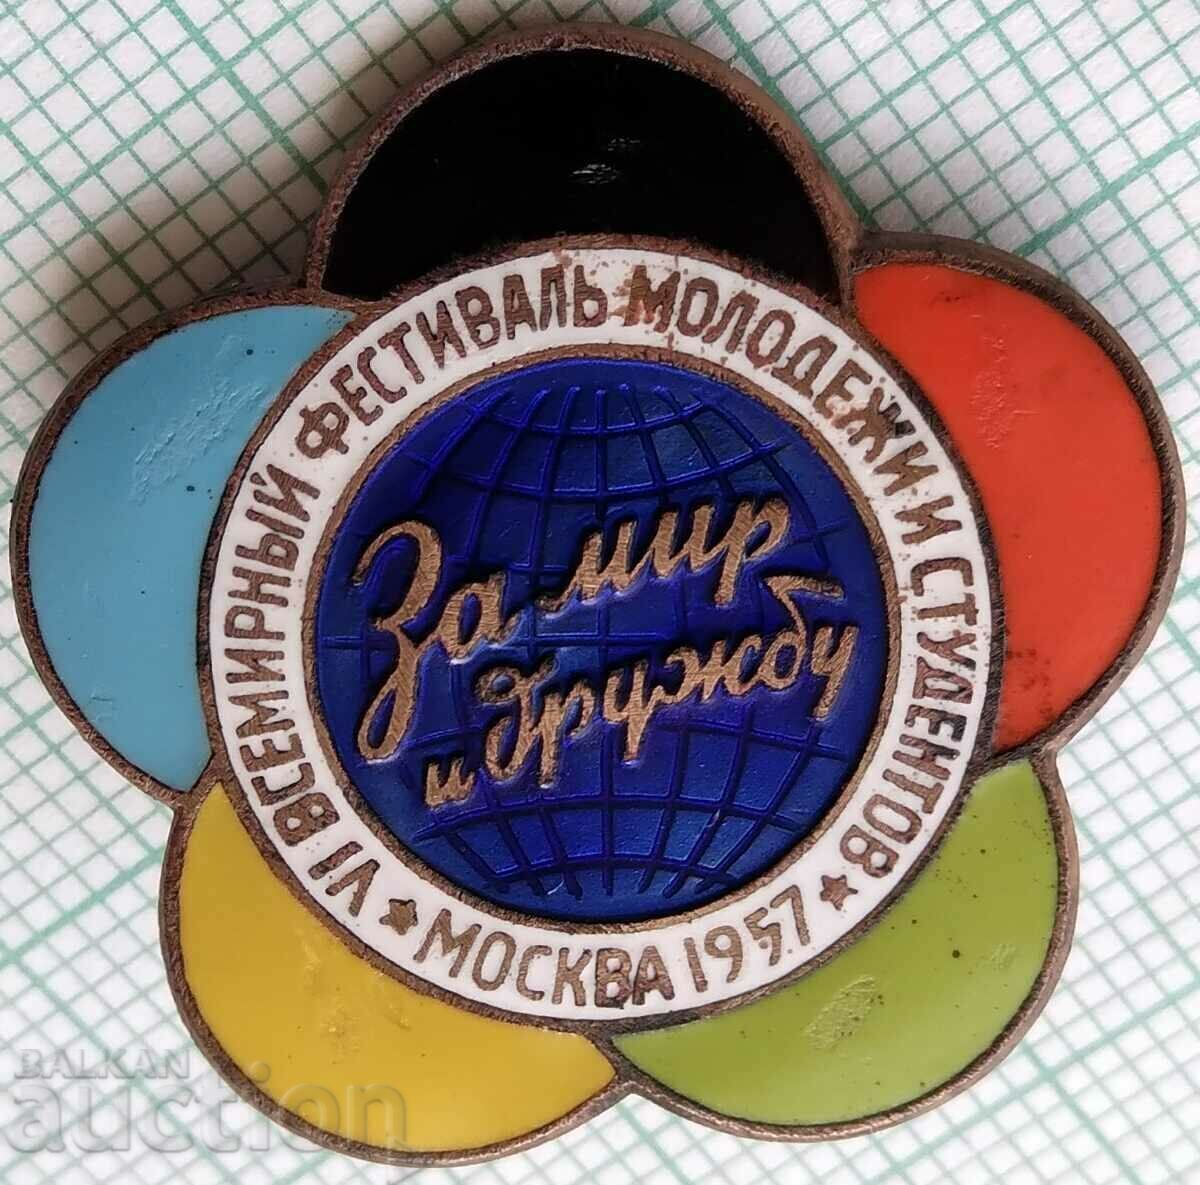 15524 Festival for youth and students Moscow 1957 - enamel